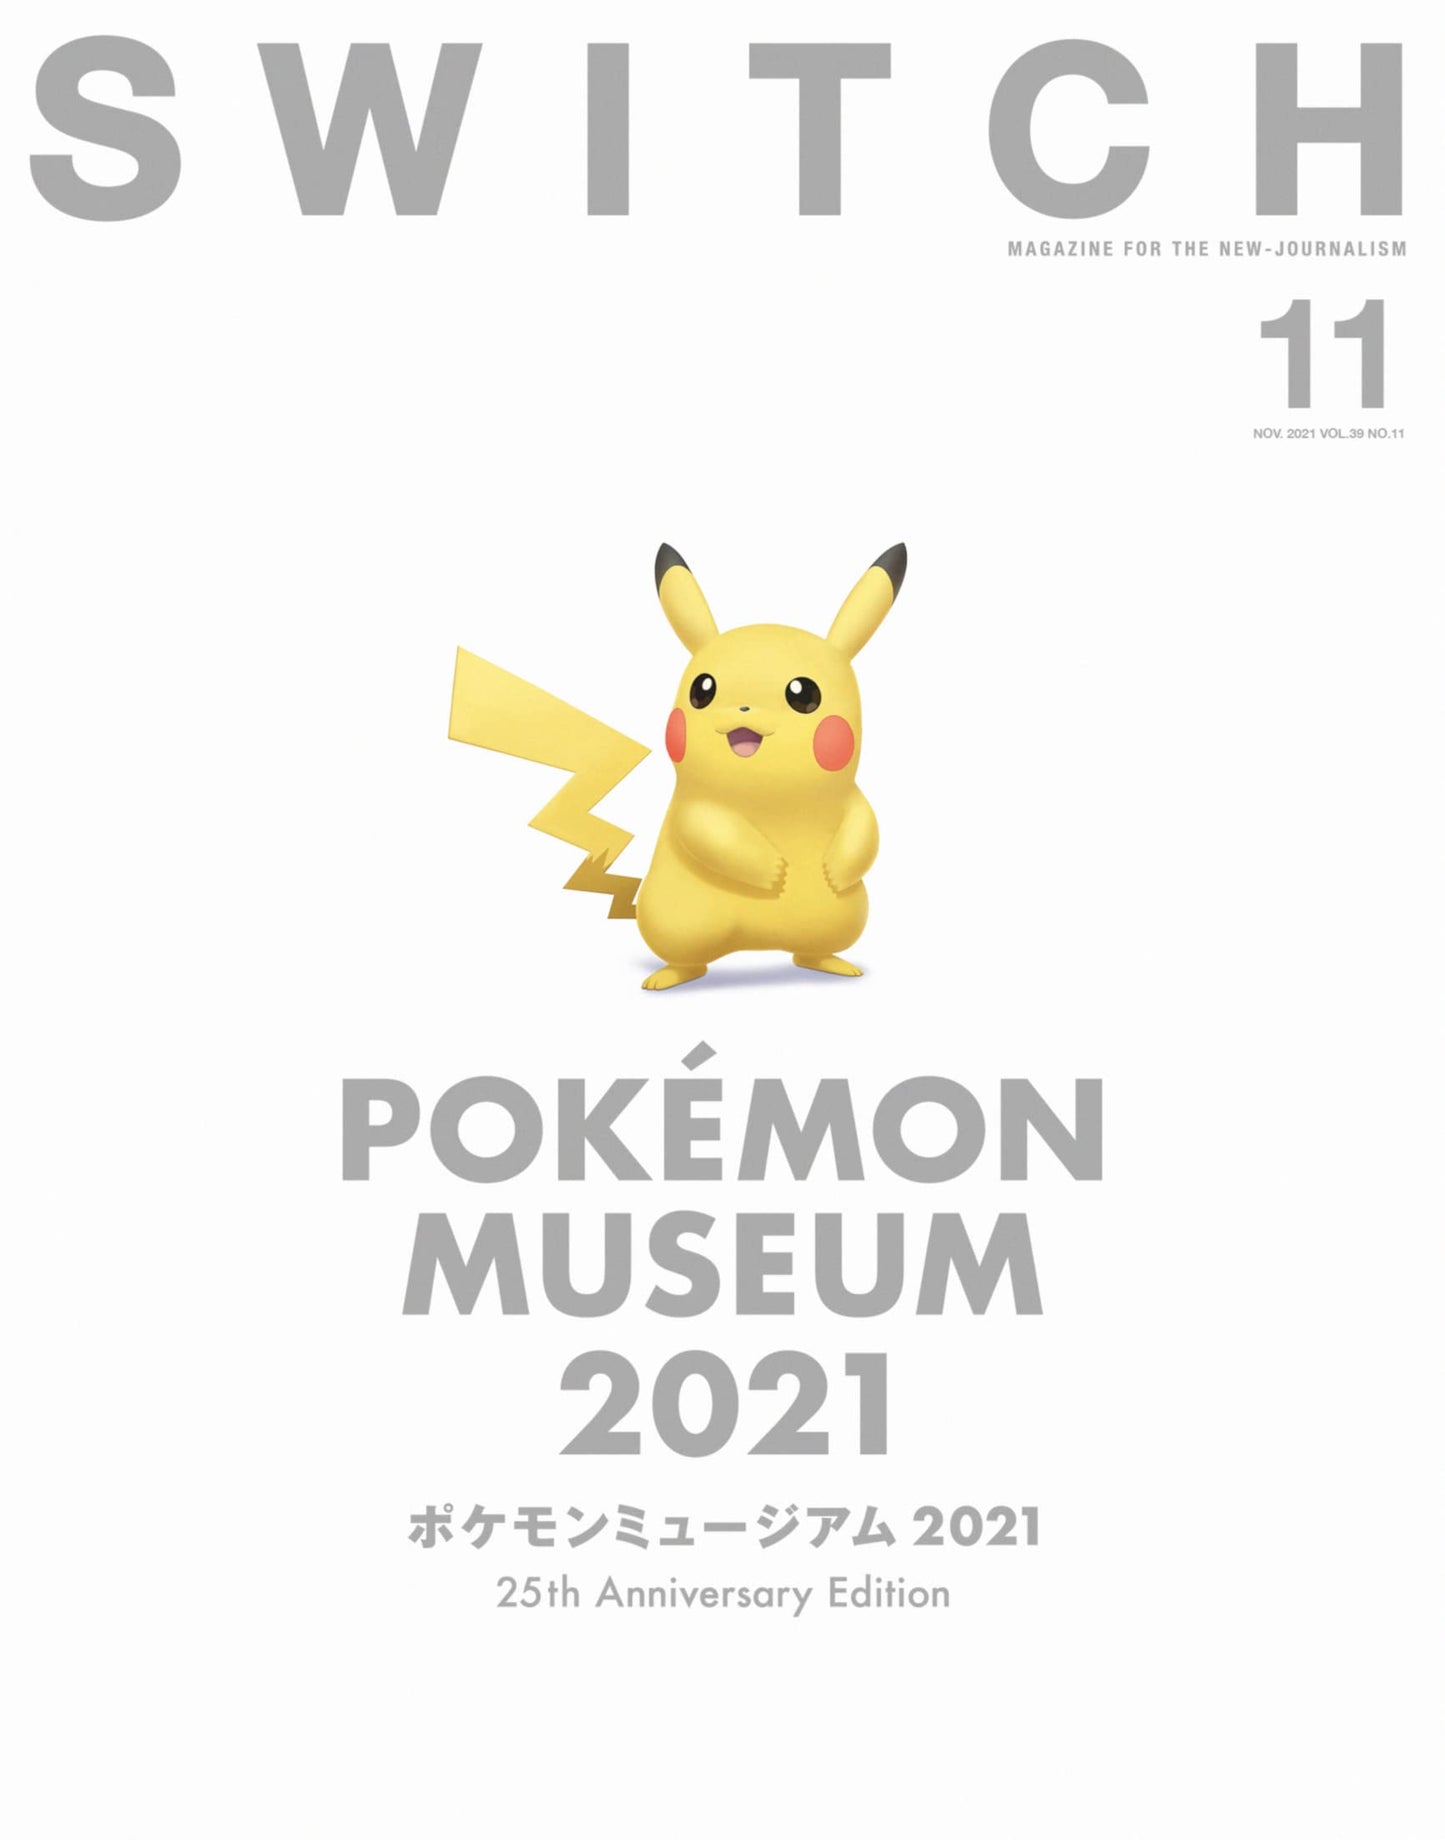 SWITCH Vol. 39 No. 11 Japanese magazine front cover